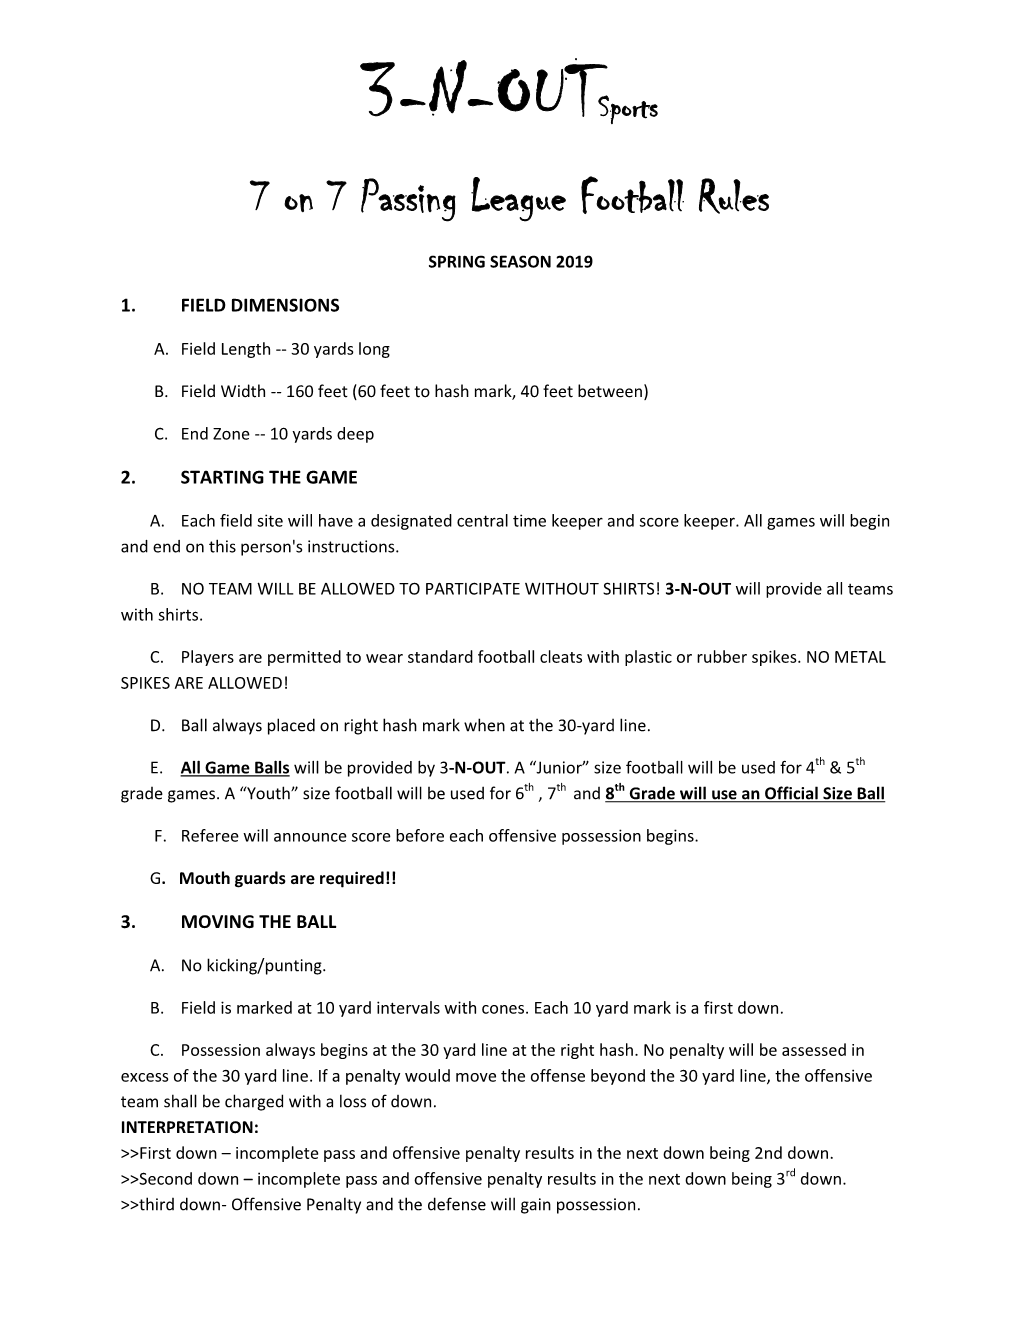 3-N-Outsports 7 on 7 Passing League Football Rules